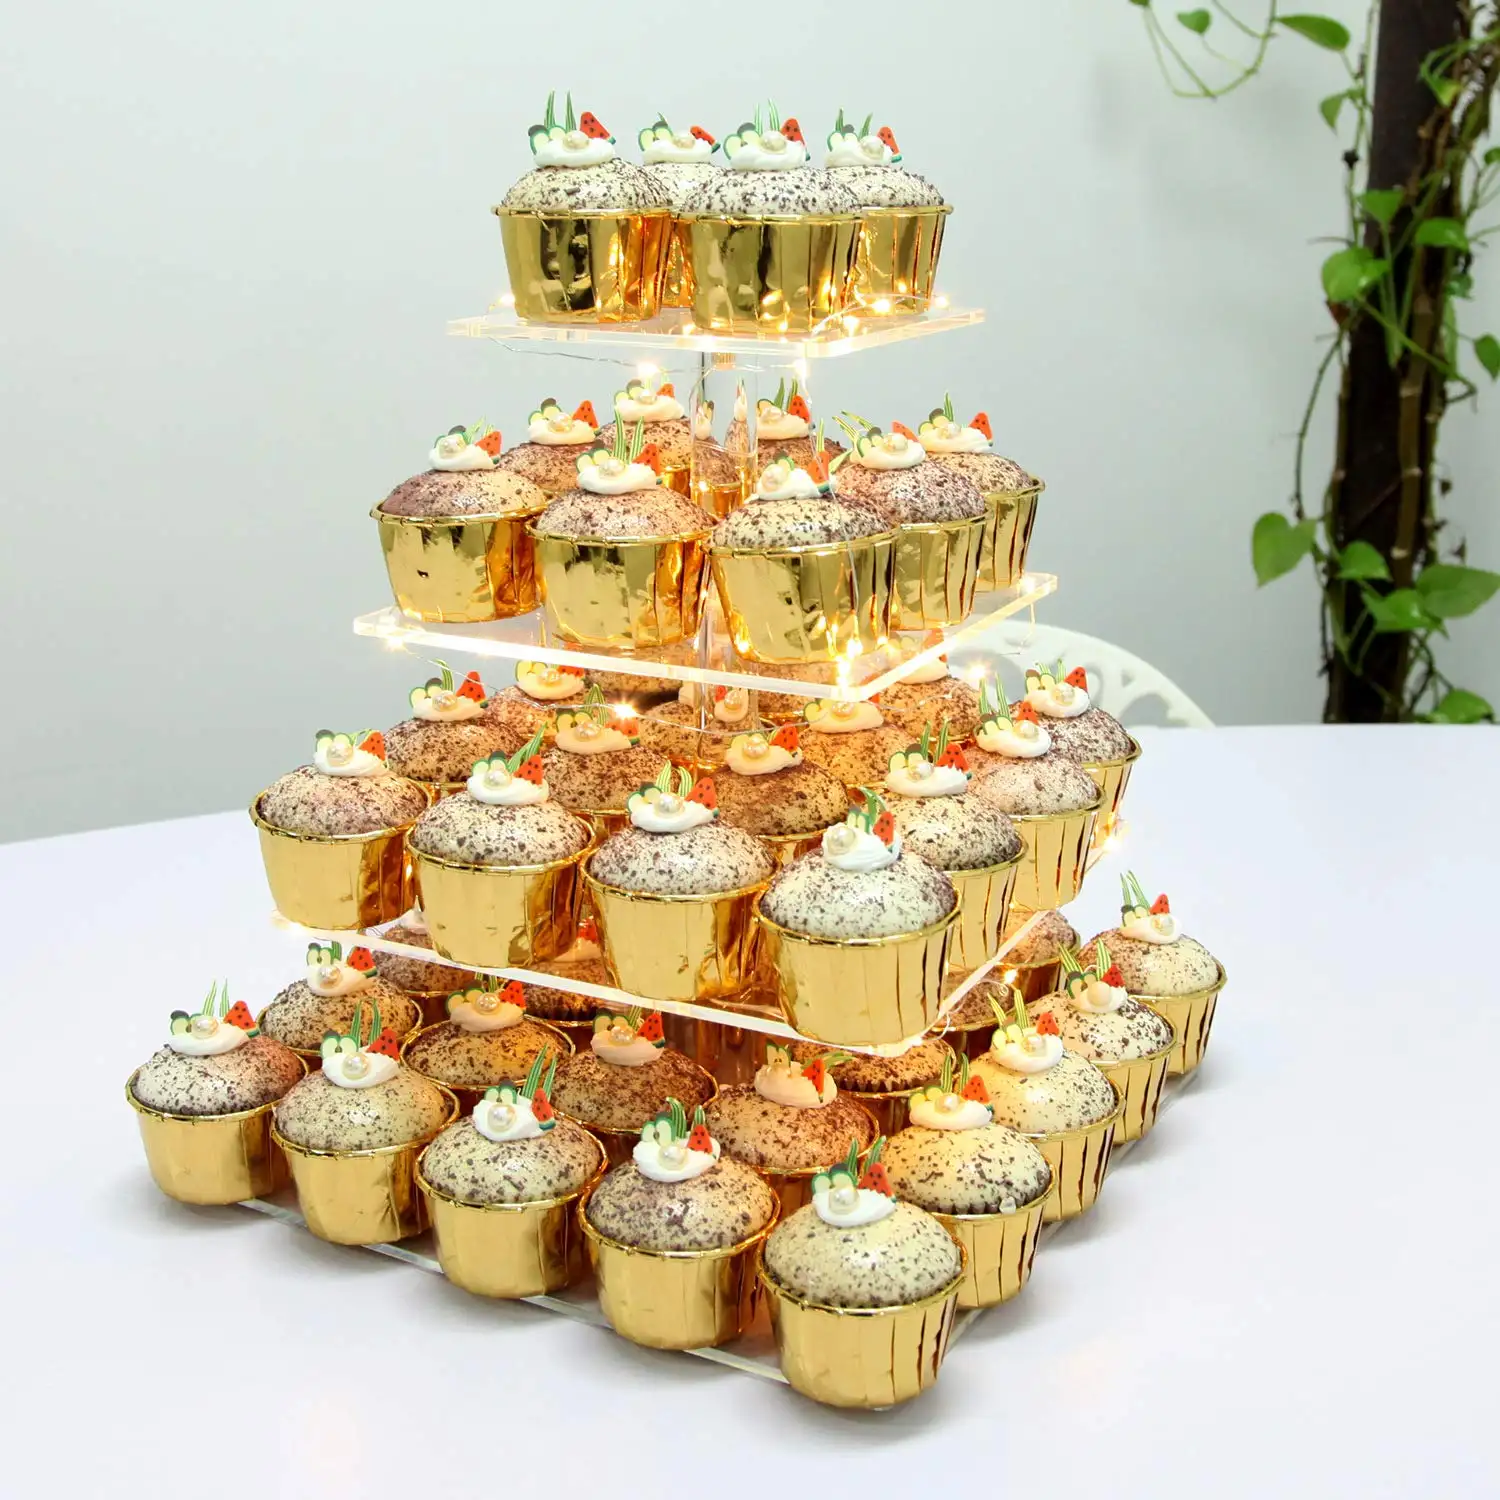 Custom Pastry Stand 4 Tier Acrylic Cupcake Display Stand with LED String Lights For Birthday Wedding Party